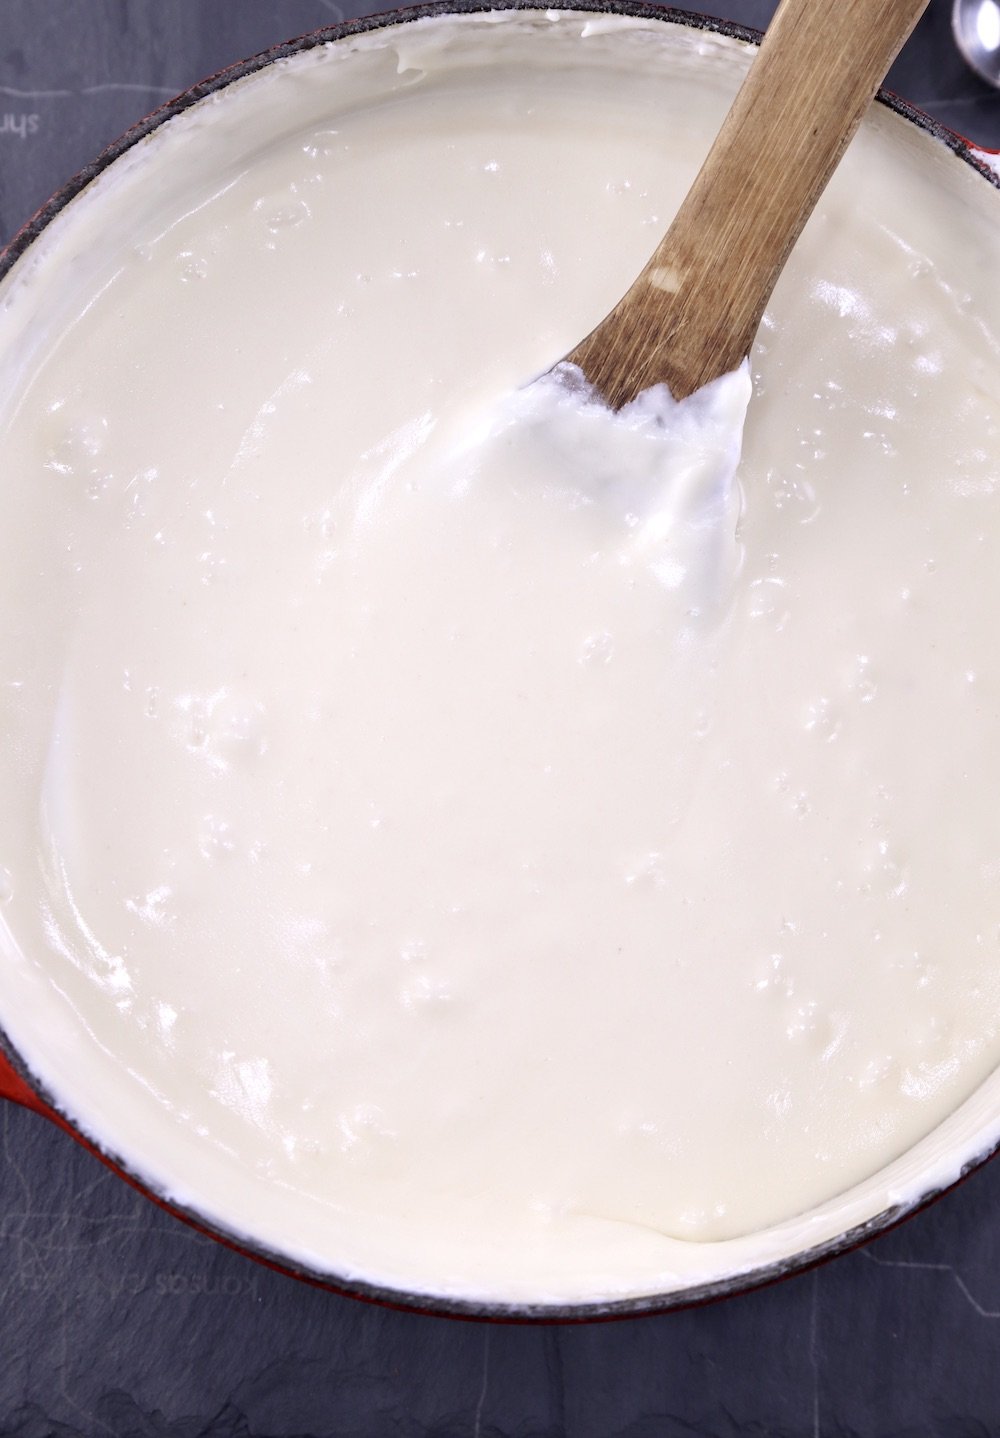 Vanilla Fudge mixture in a pan with wood spoon submerged